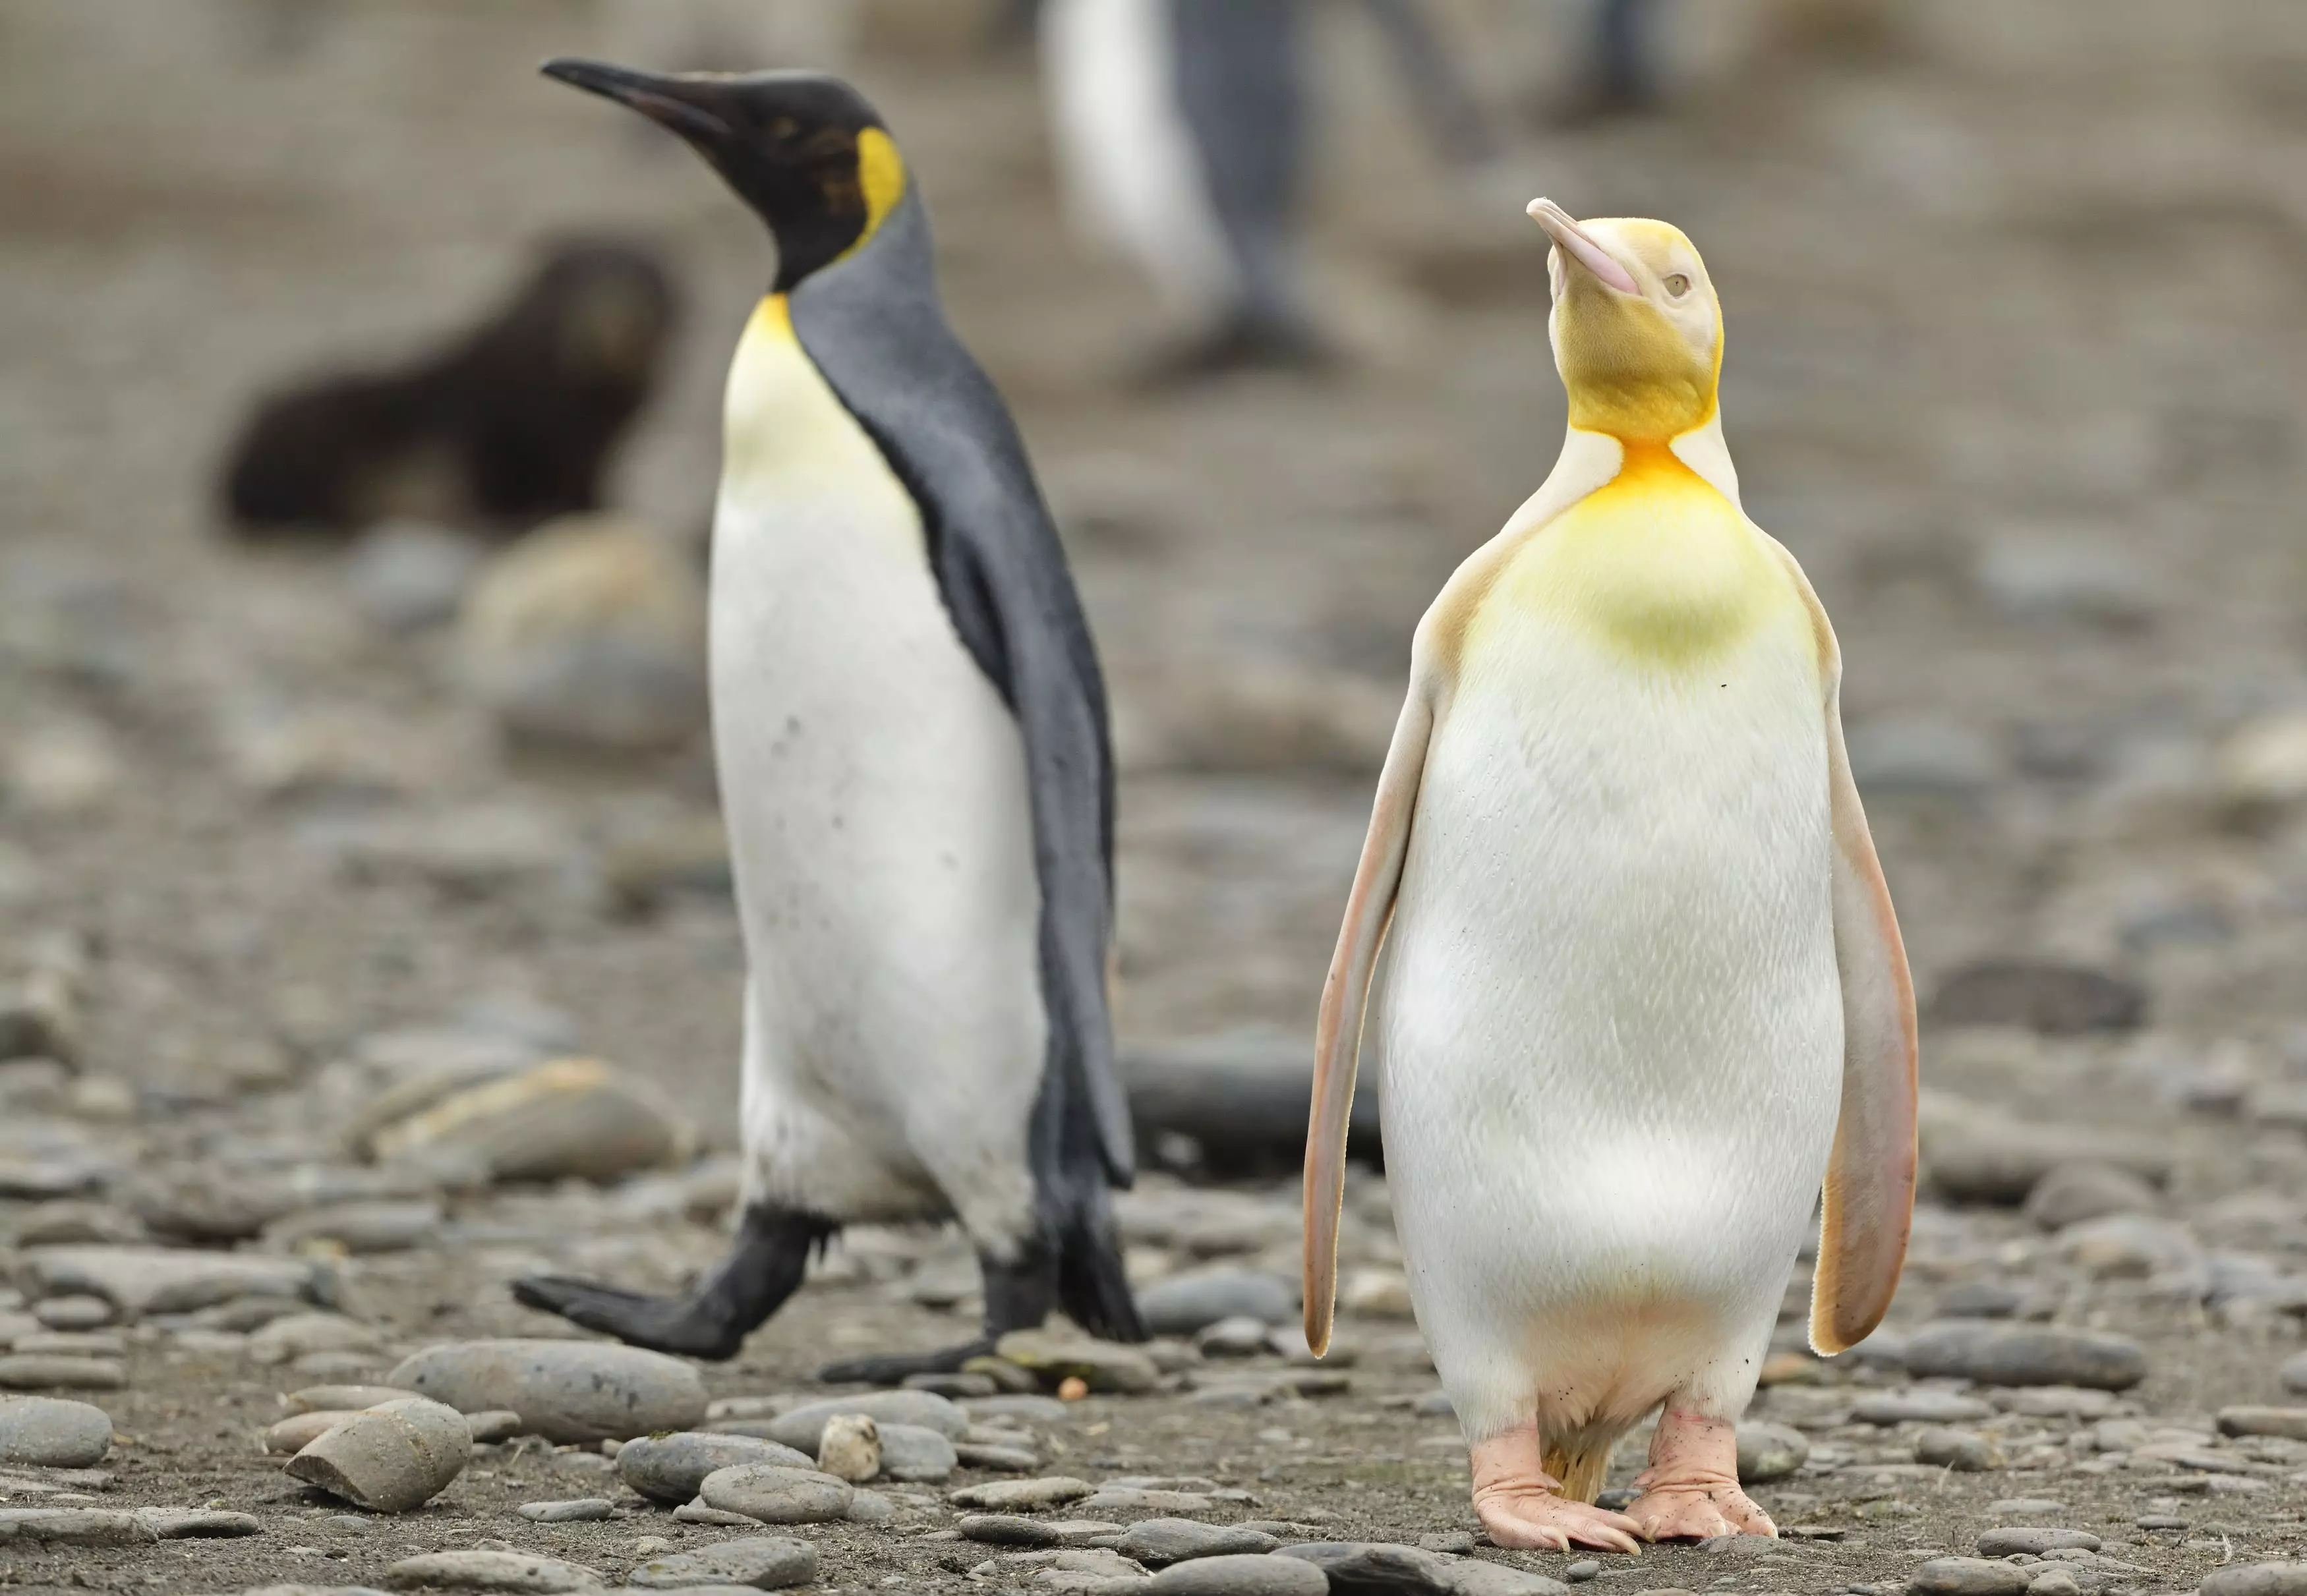 The unique penguin has a bright yellow plumage instead of the usual black feathers (